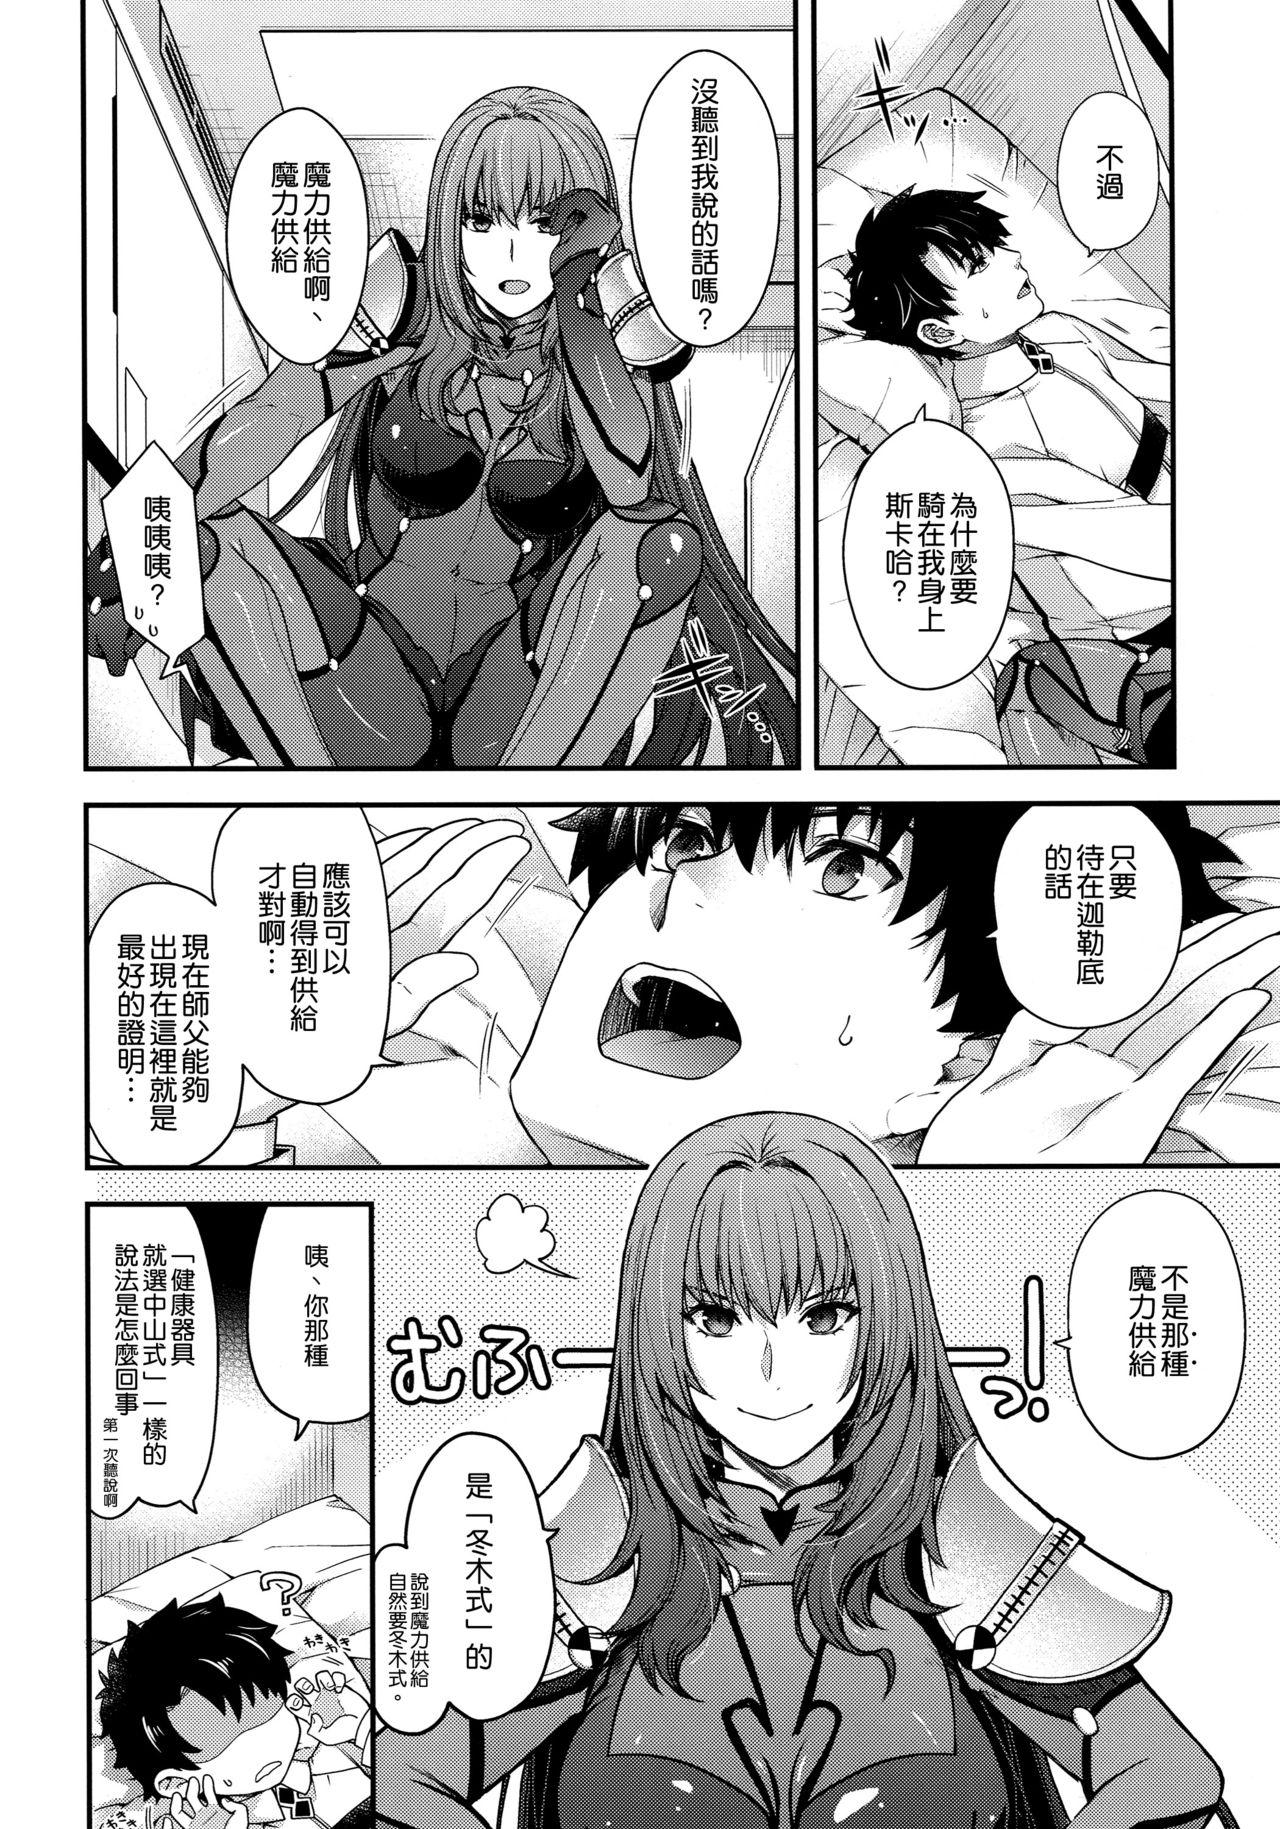 Sextoys parthas - Fate grand order Money - Page 4